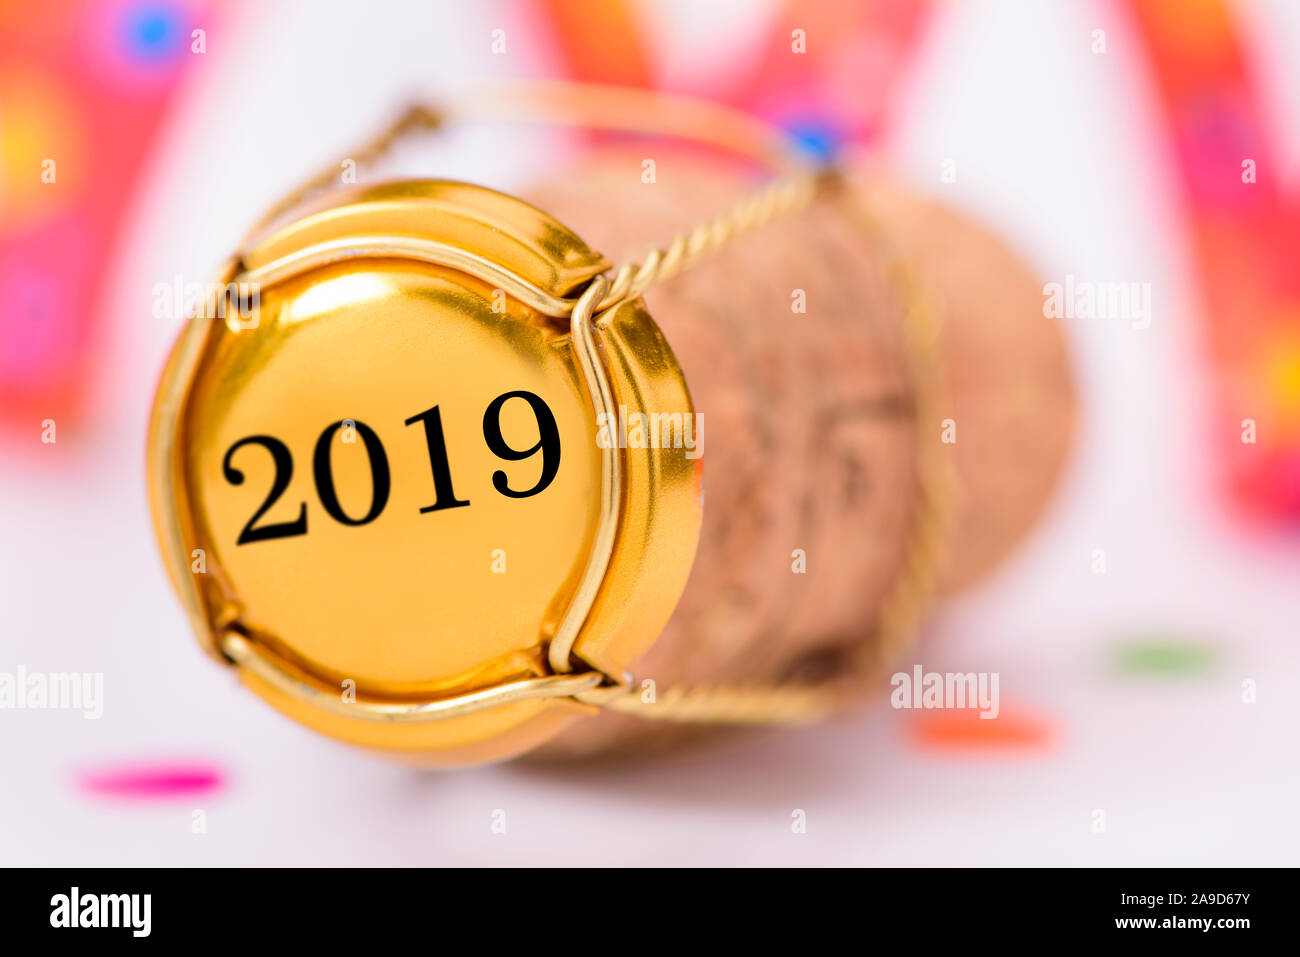 Champagne cork, detail, at 2019 New Year's party Stock Photo